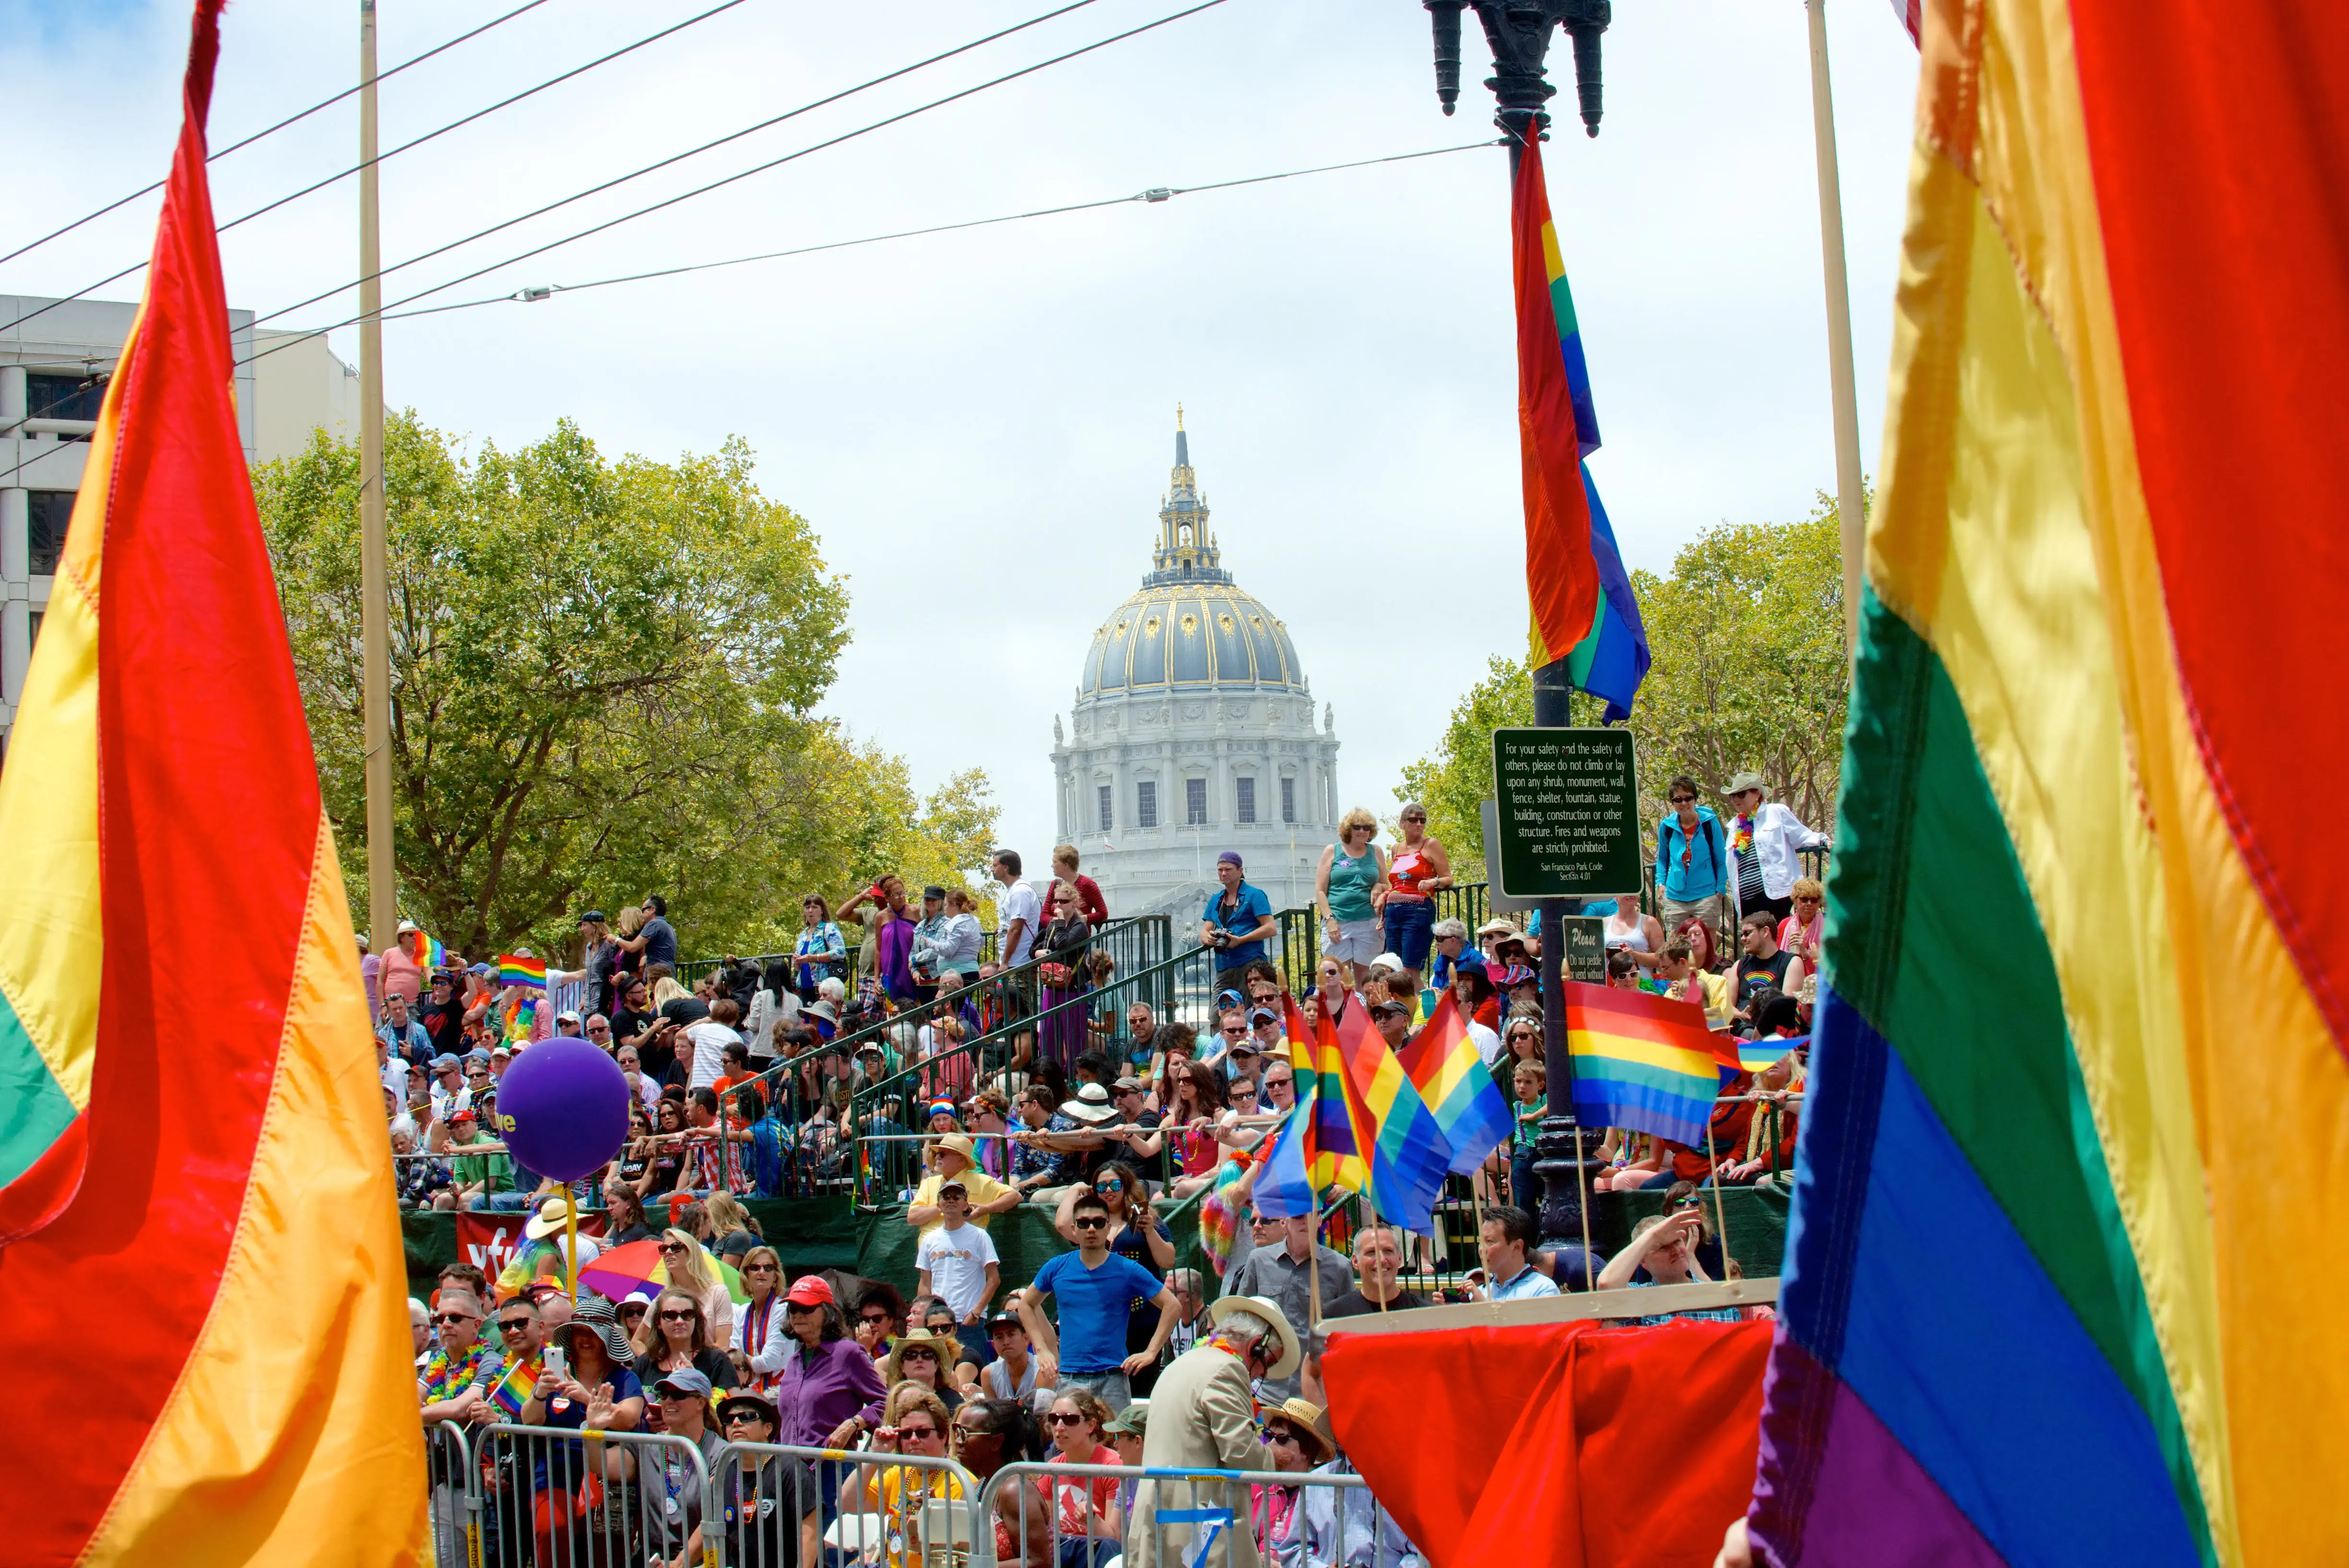 a photograph; rainbow flags and a side-view of the seated and accessible parade areas from the perspective of a parade marcher